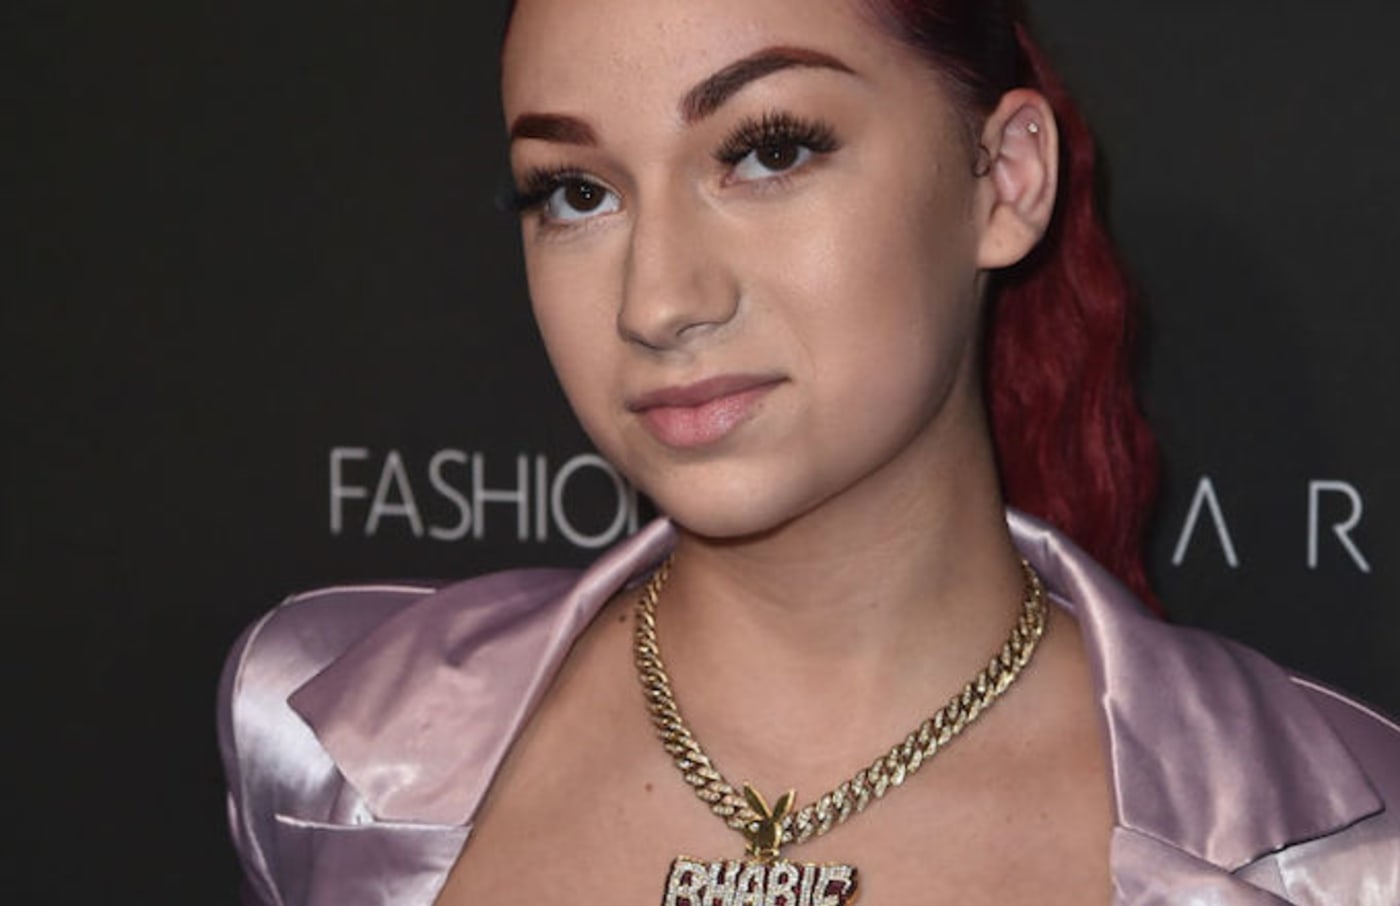 Bhad Bhabie makeup launch